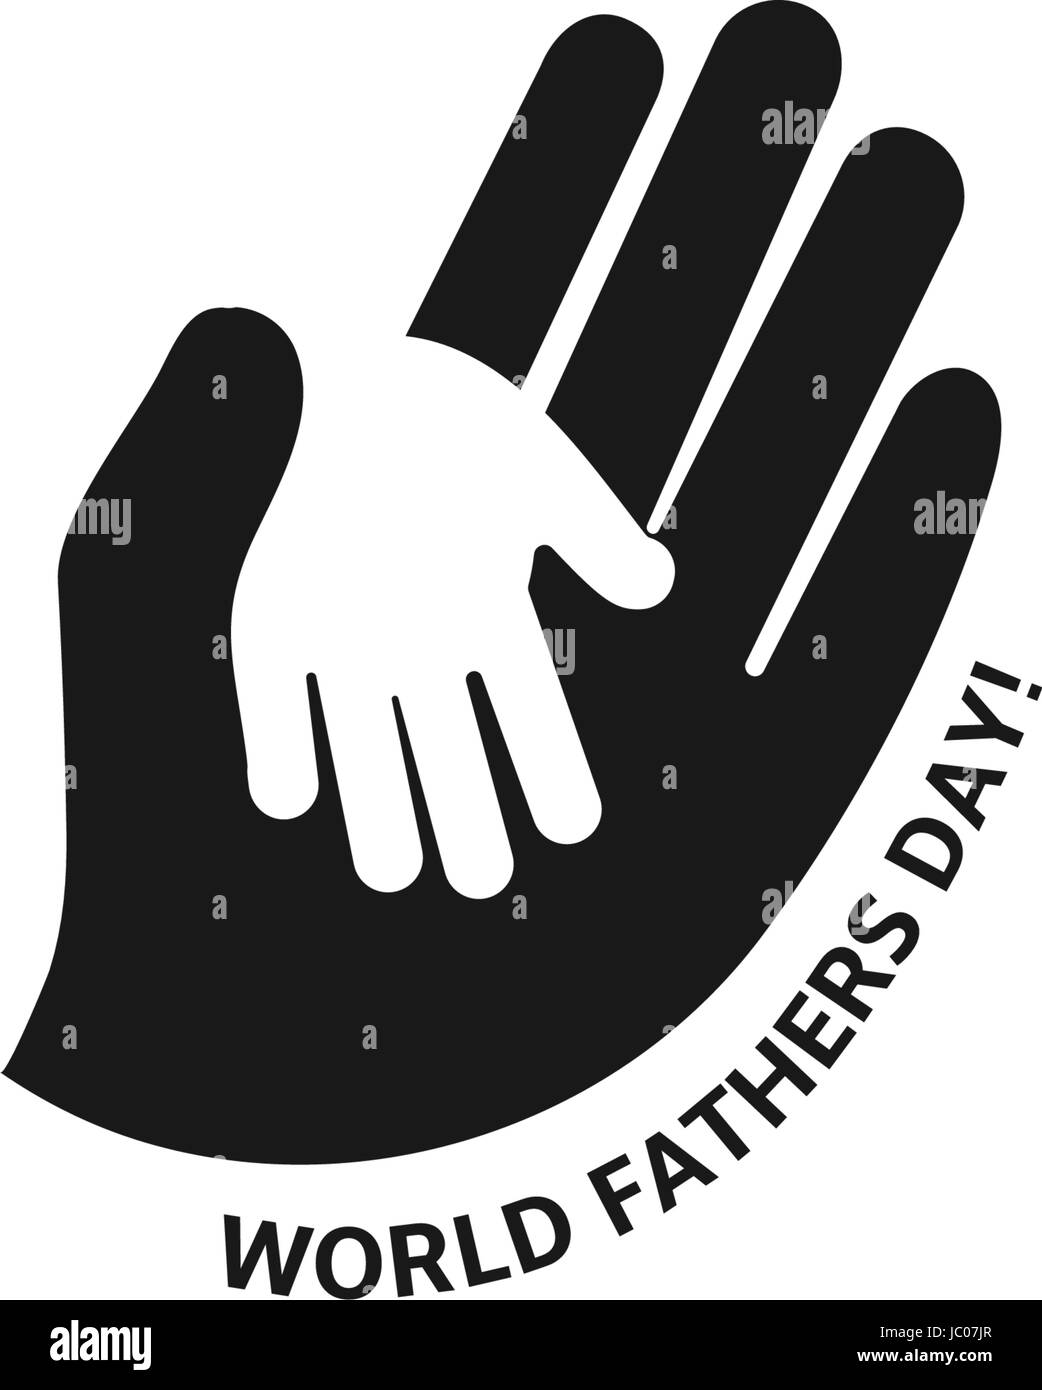 Holding Hand of a child in the hand of an adult vector logo. World Father Day. Symbol of care, kindness, family, children, parents Stock Vector